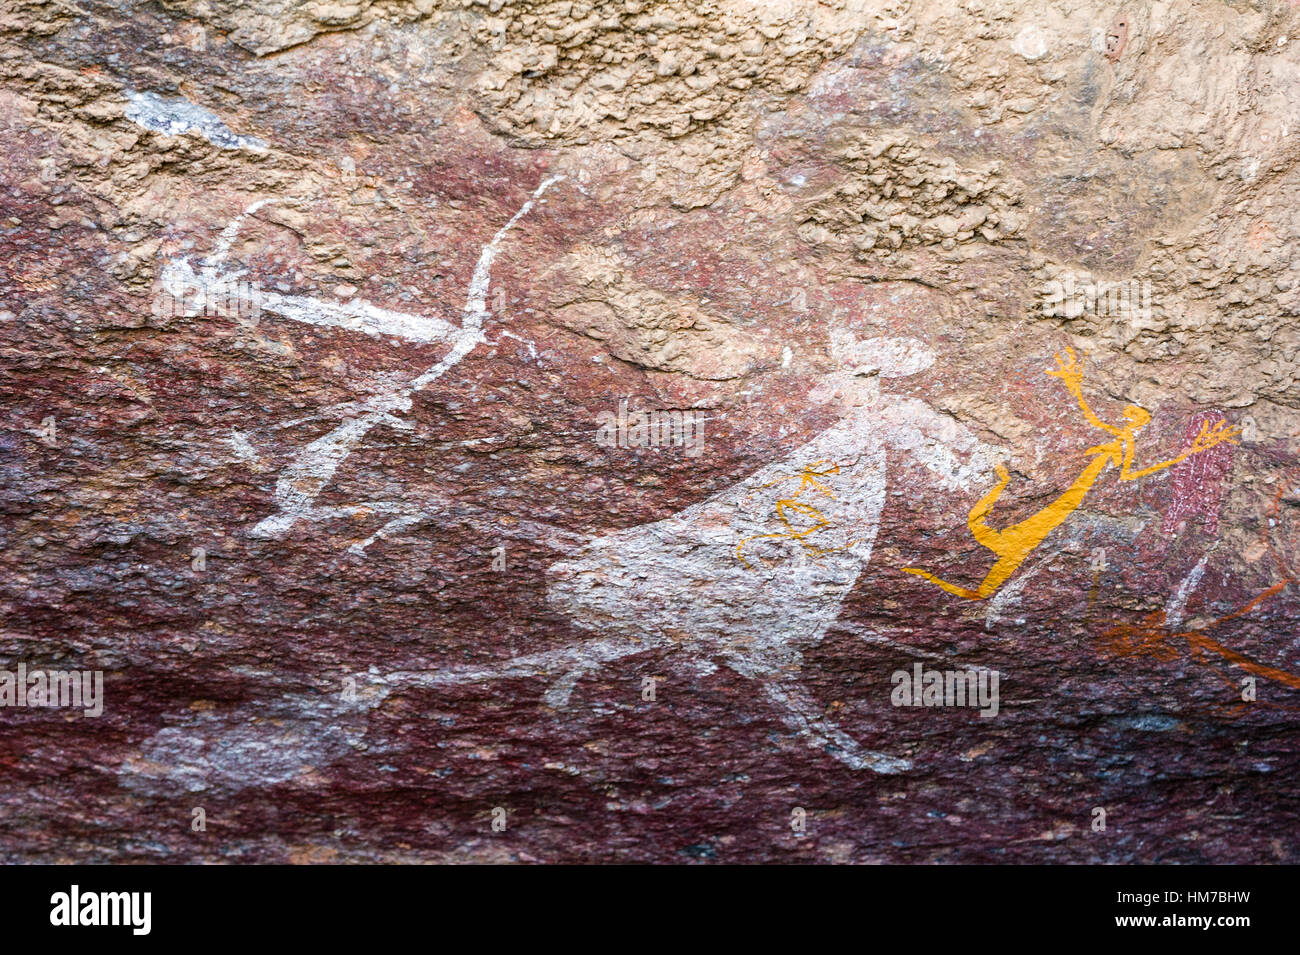 An ancient image of a kangaroo and human figures painted in an Aboriginal rock painting art gallery. Stock Photo